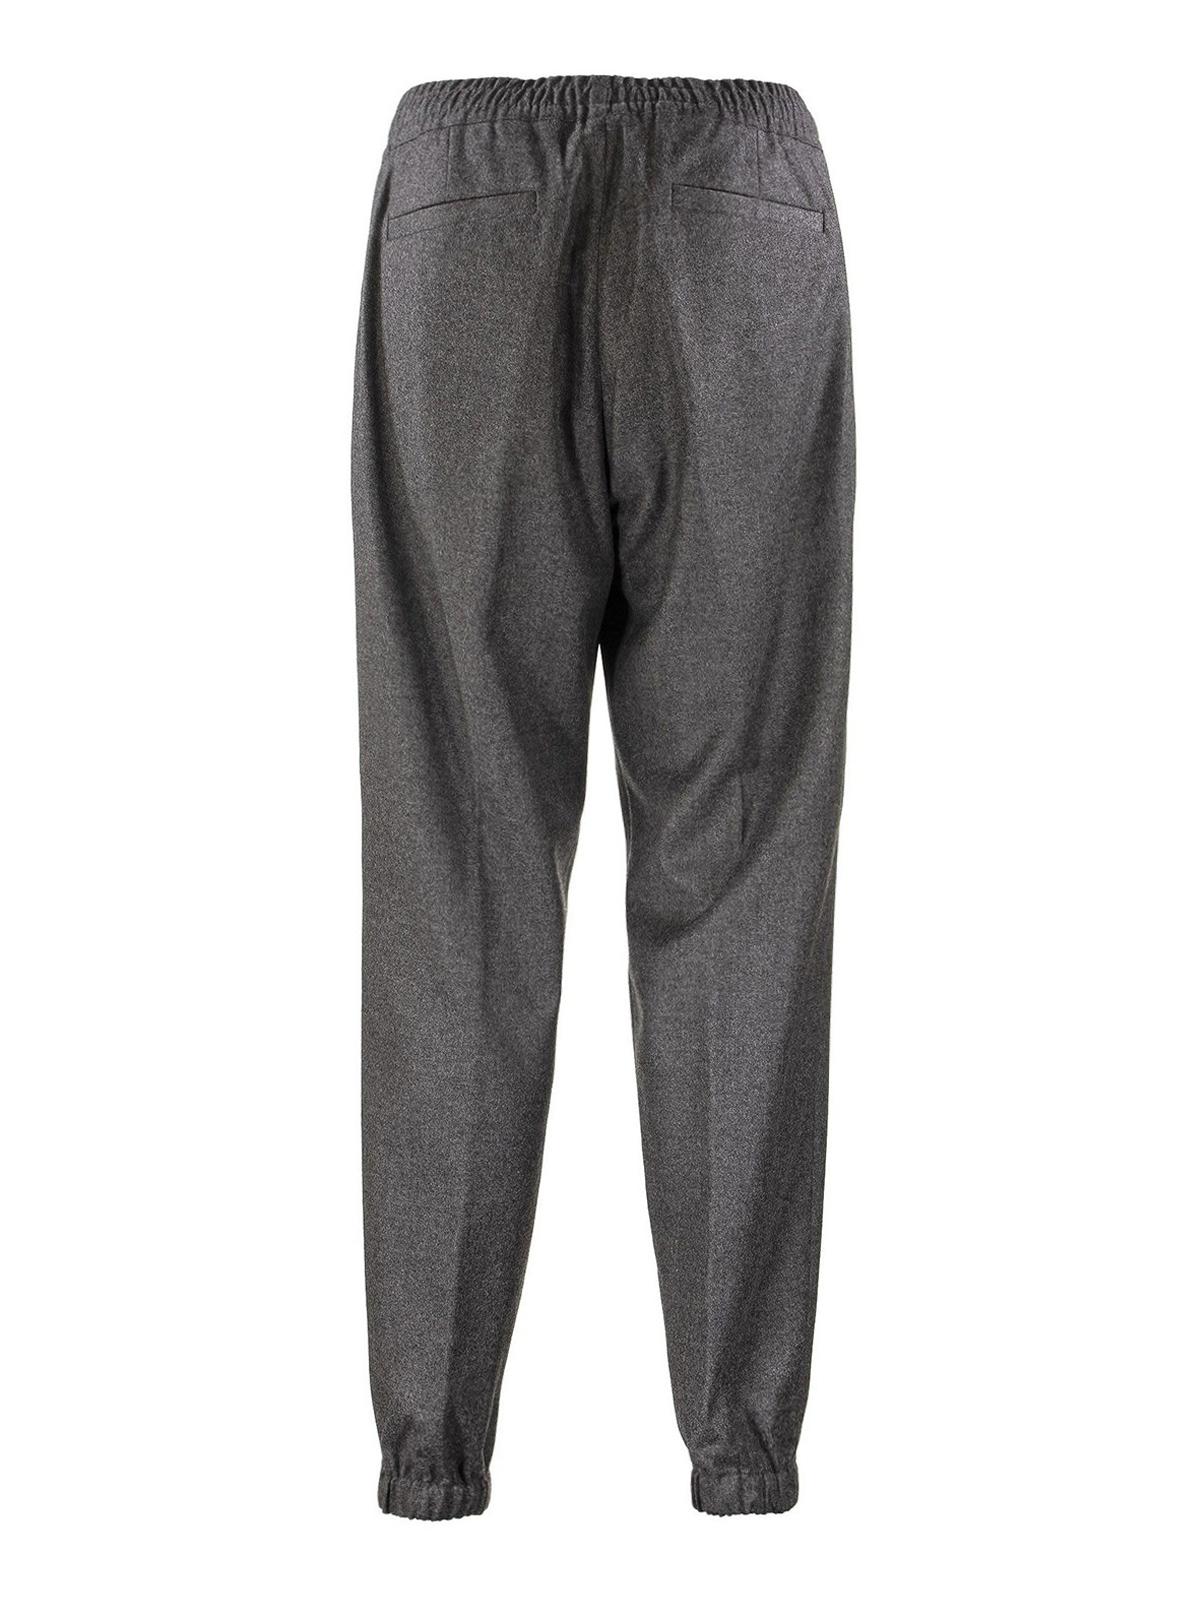 Loro Piana Cashmere Wool Blend Trousers in Grey (Gray) for Men - Lyst